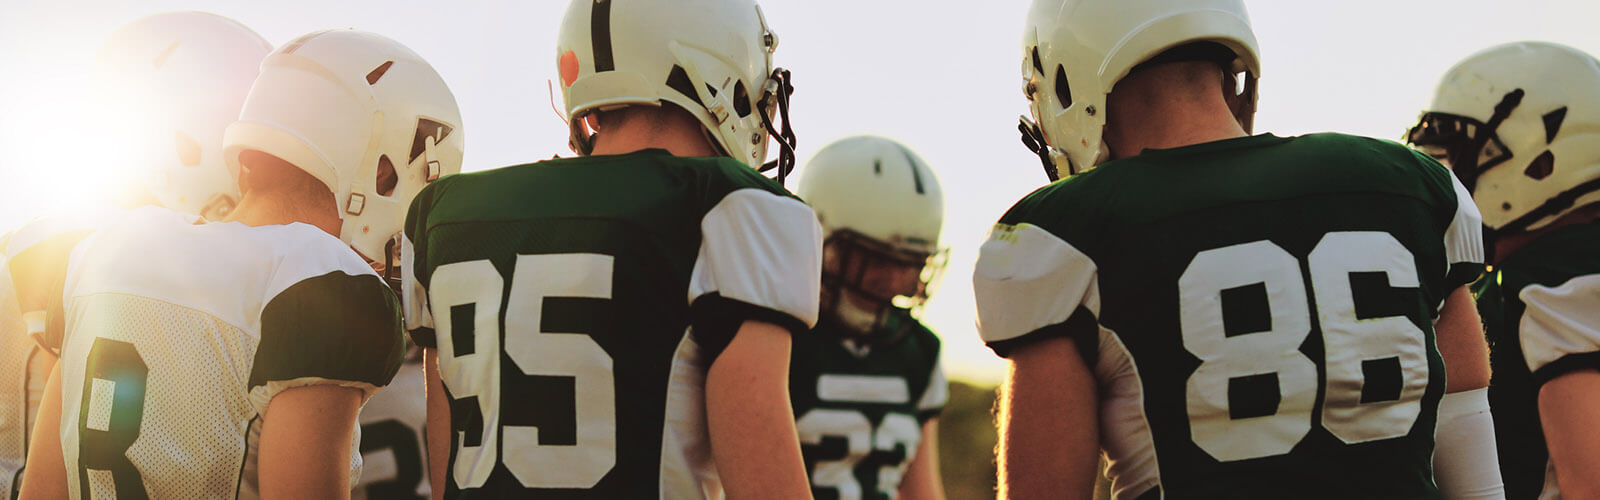 Football, Mindfulness, and the Benefits of Conscious Collaboration